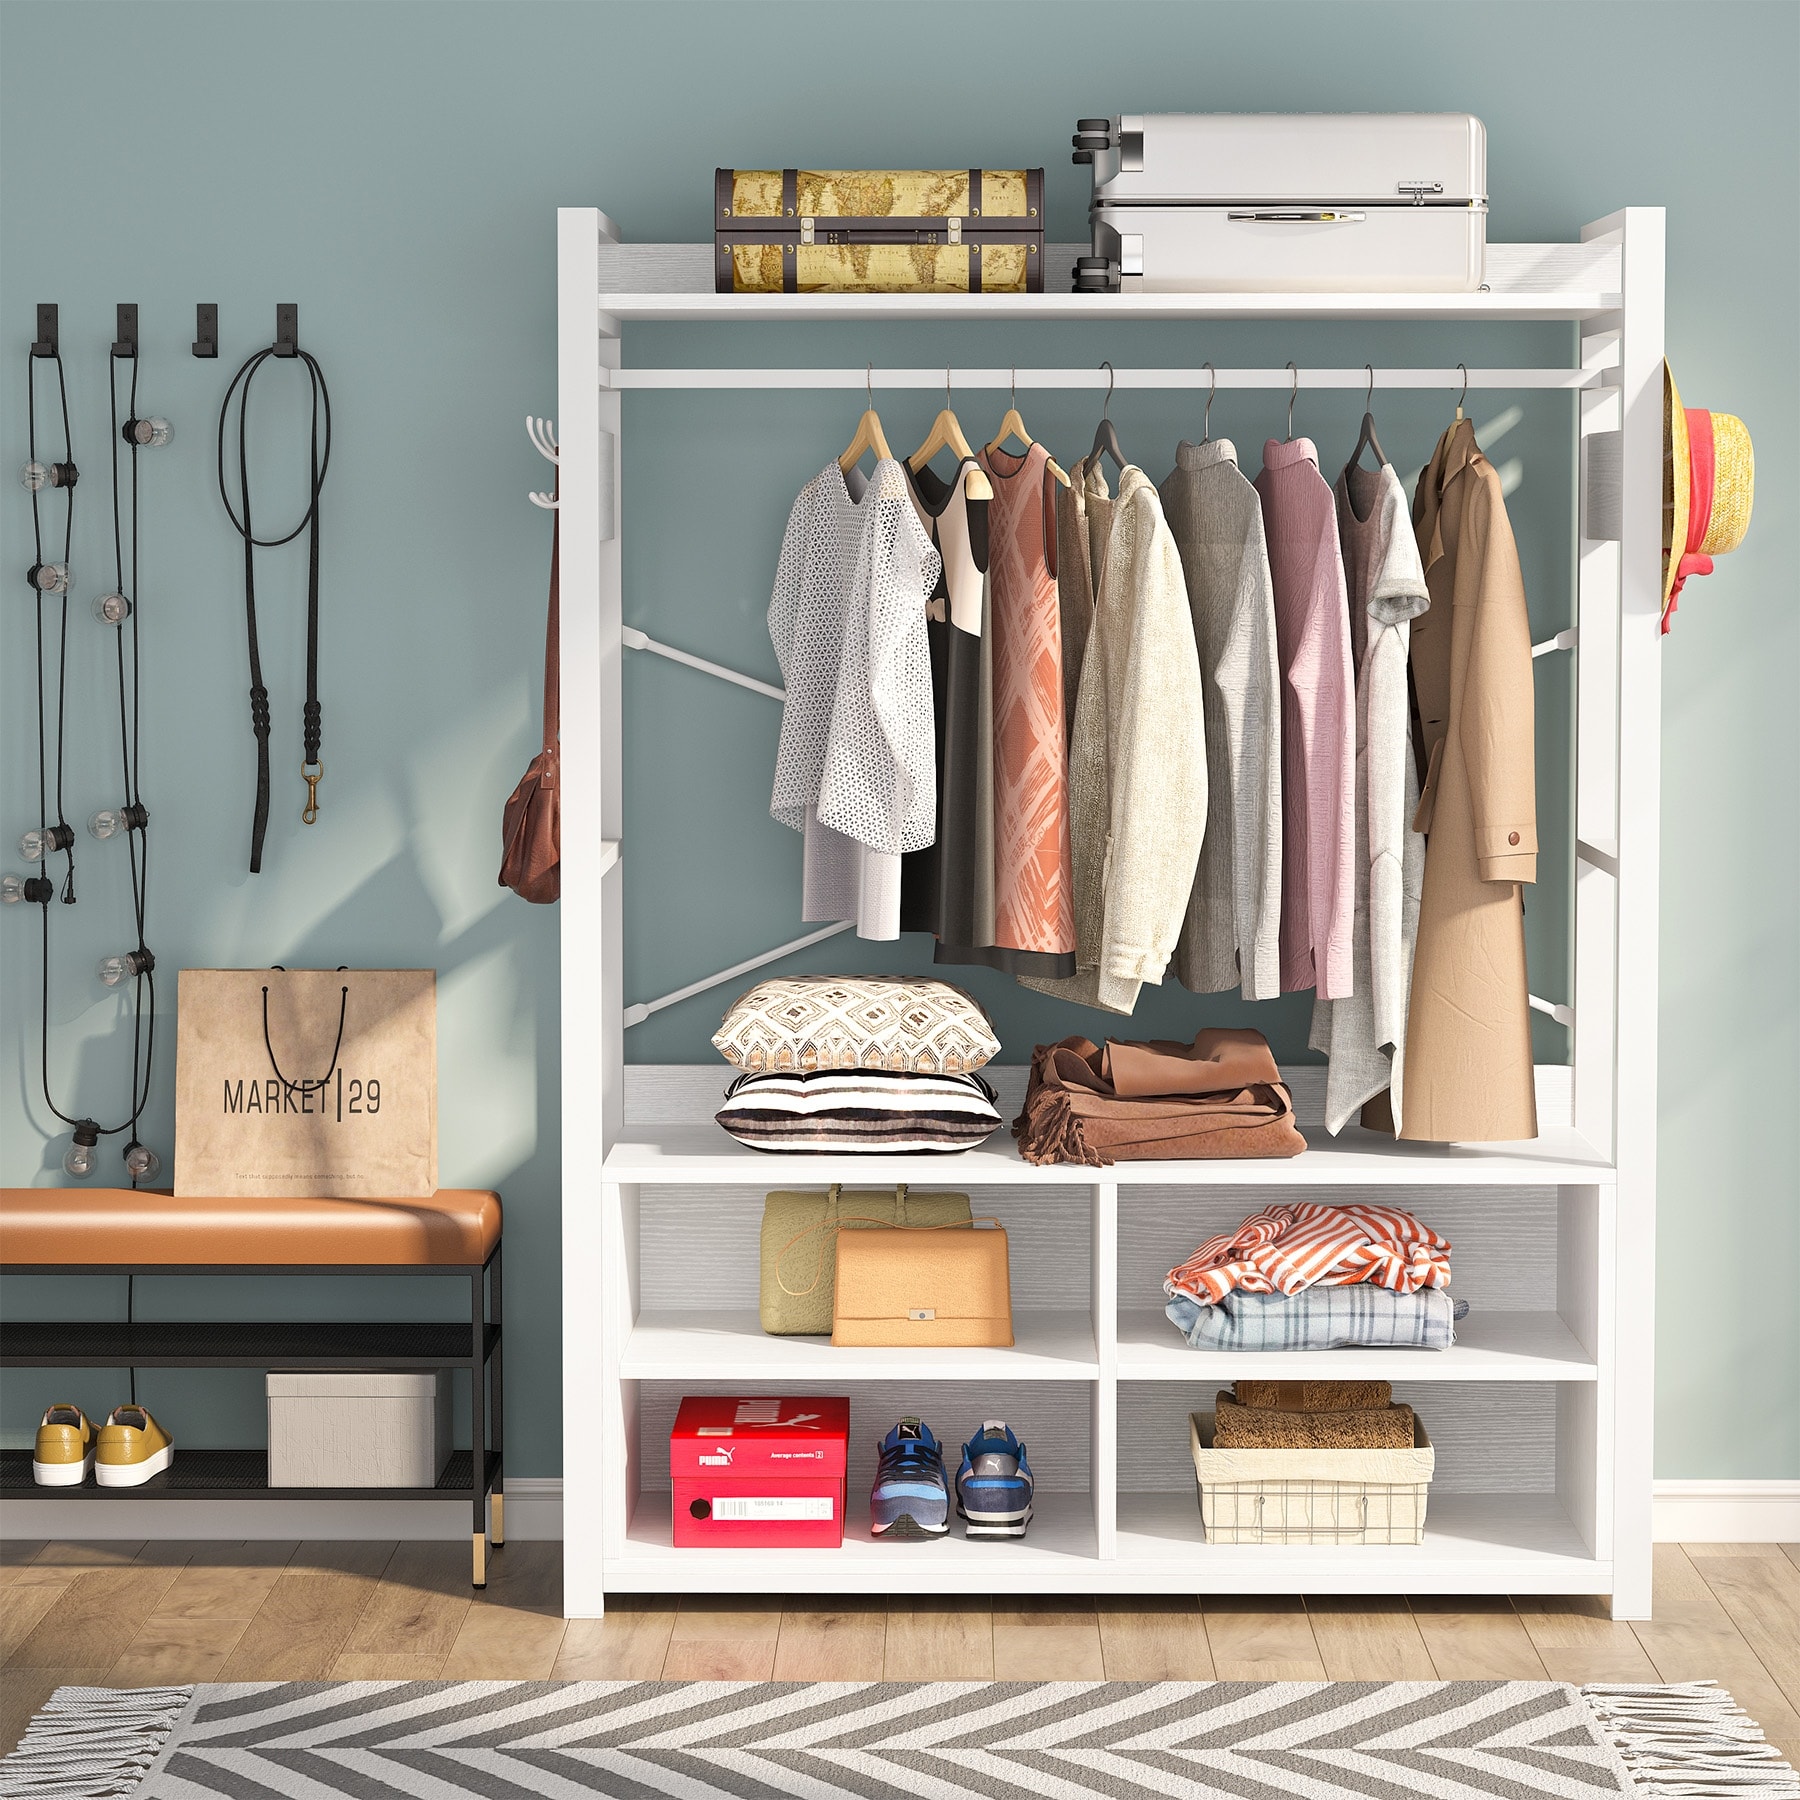 Siavonce Grey Particle Board Free-Standing Closet Organizer with